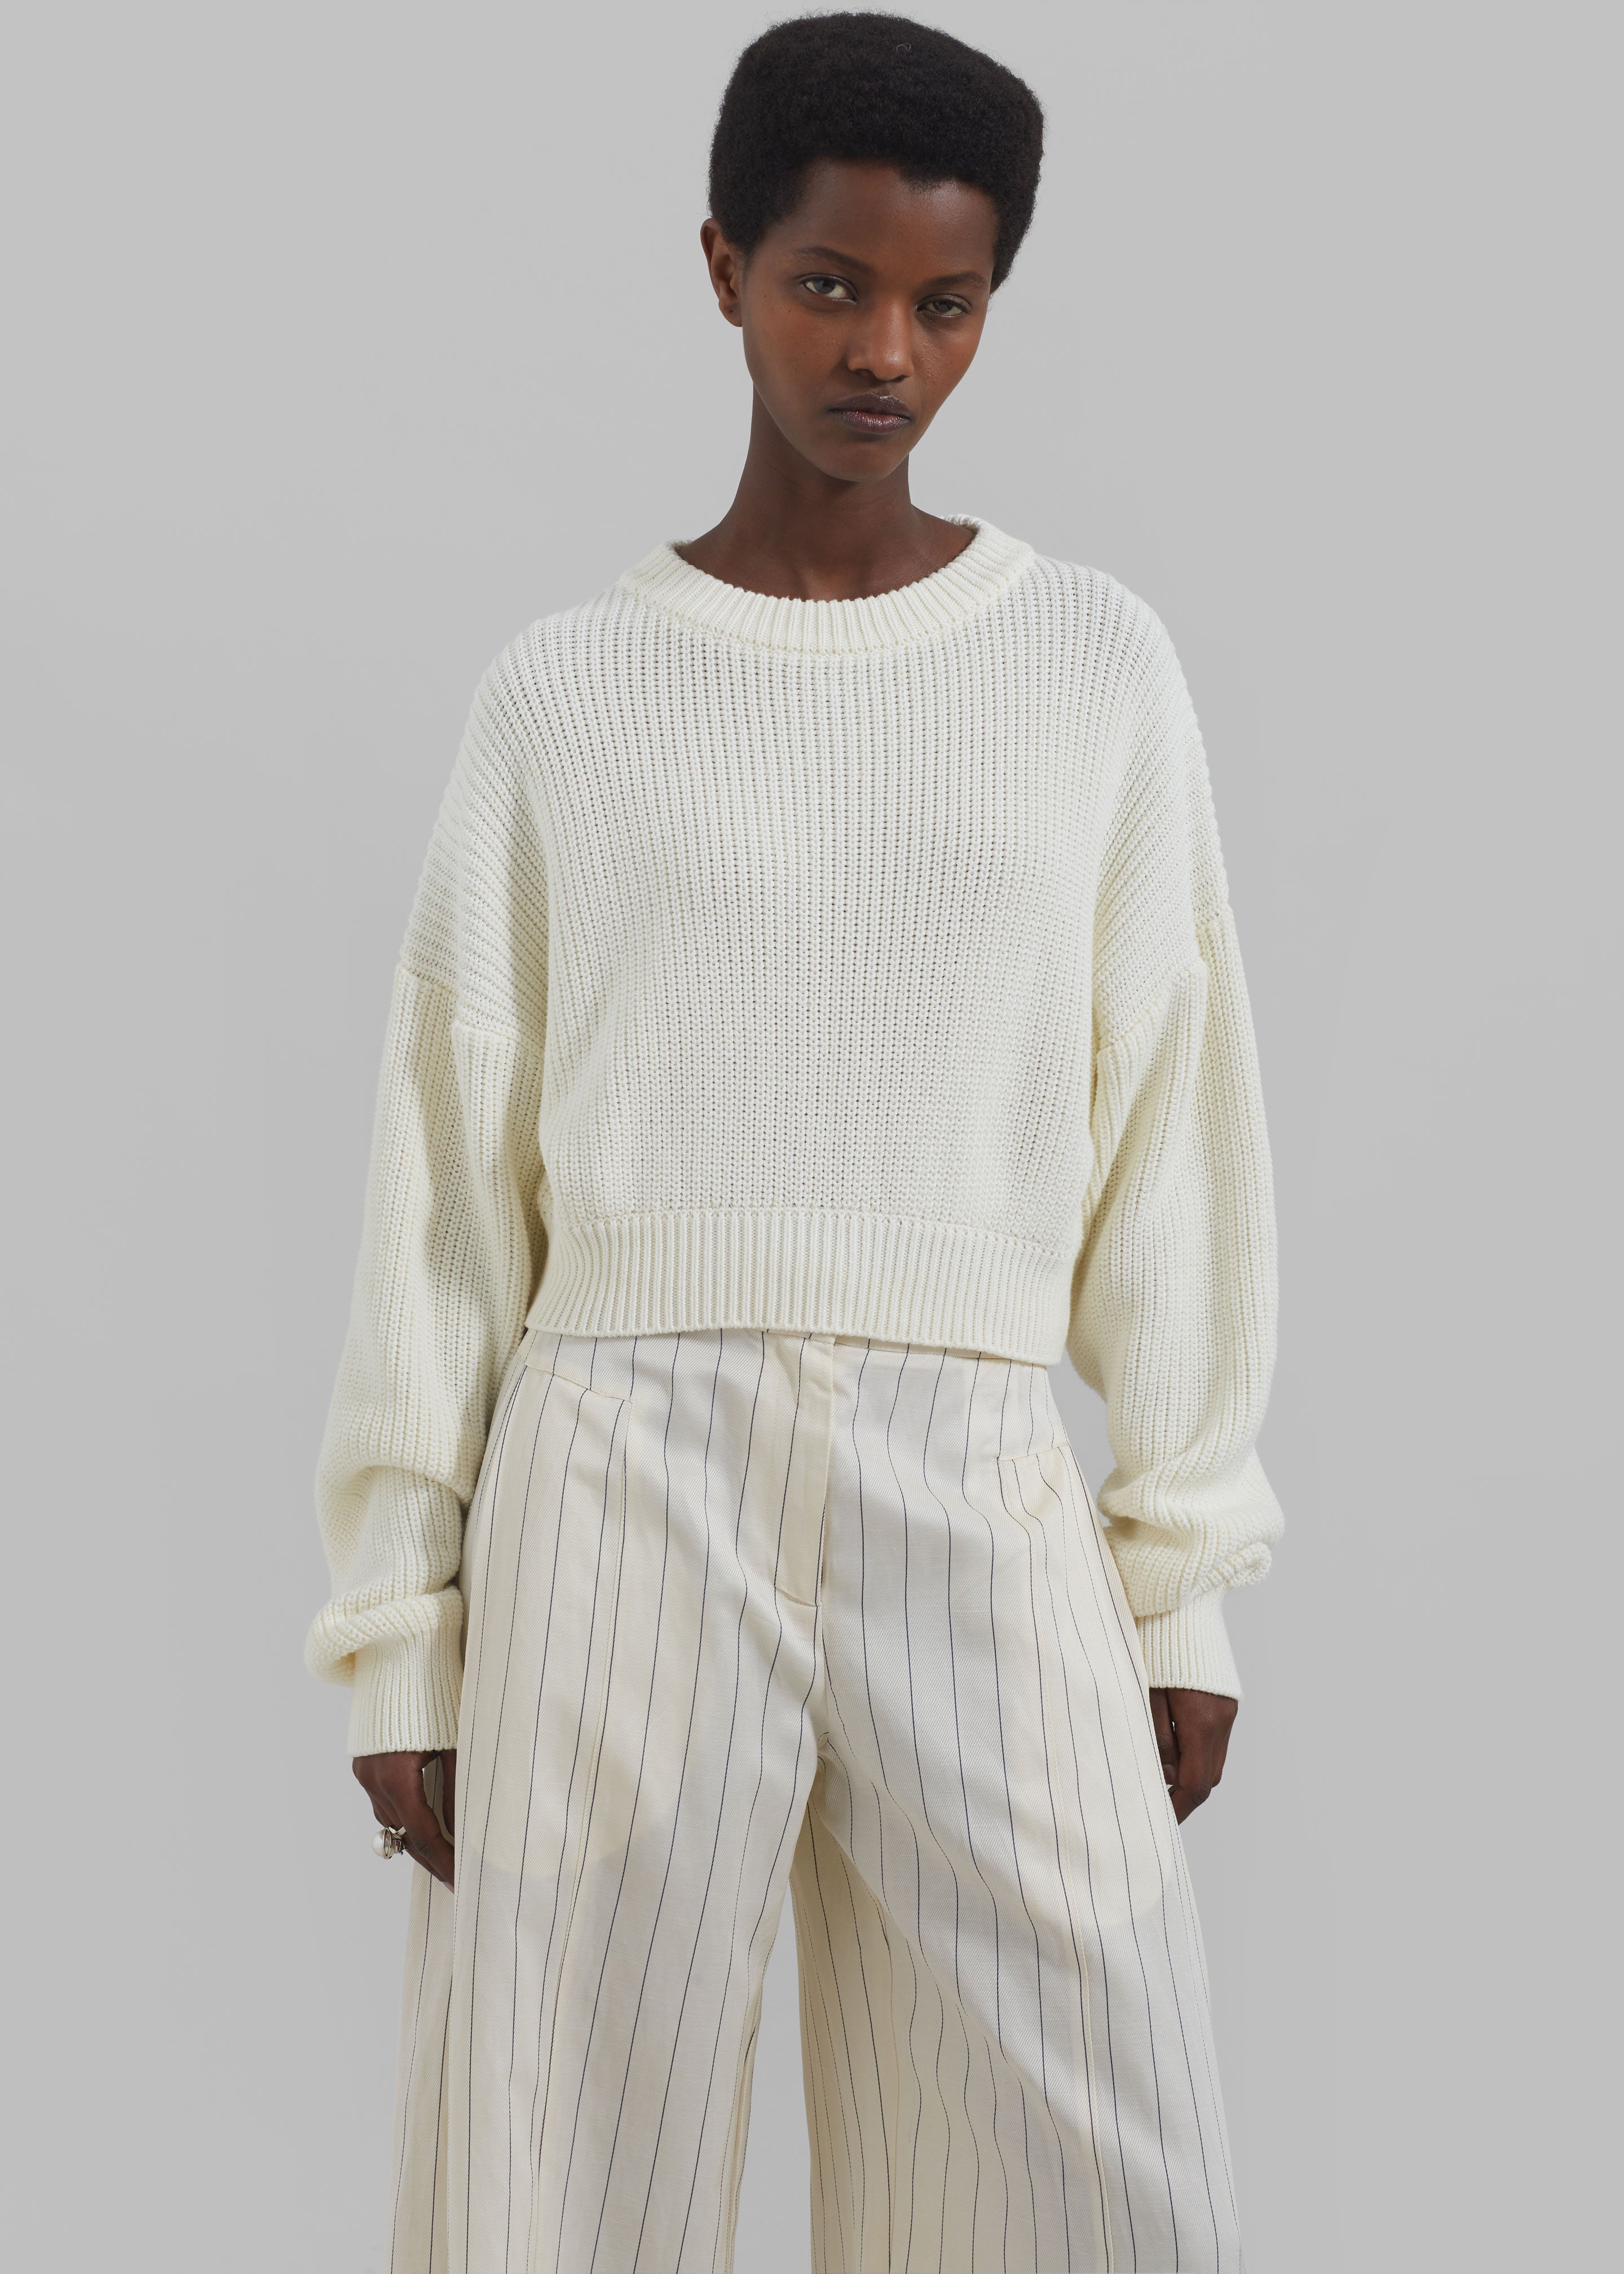 Teague Cropped Sweater - White - 4